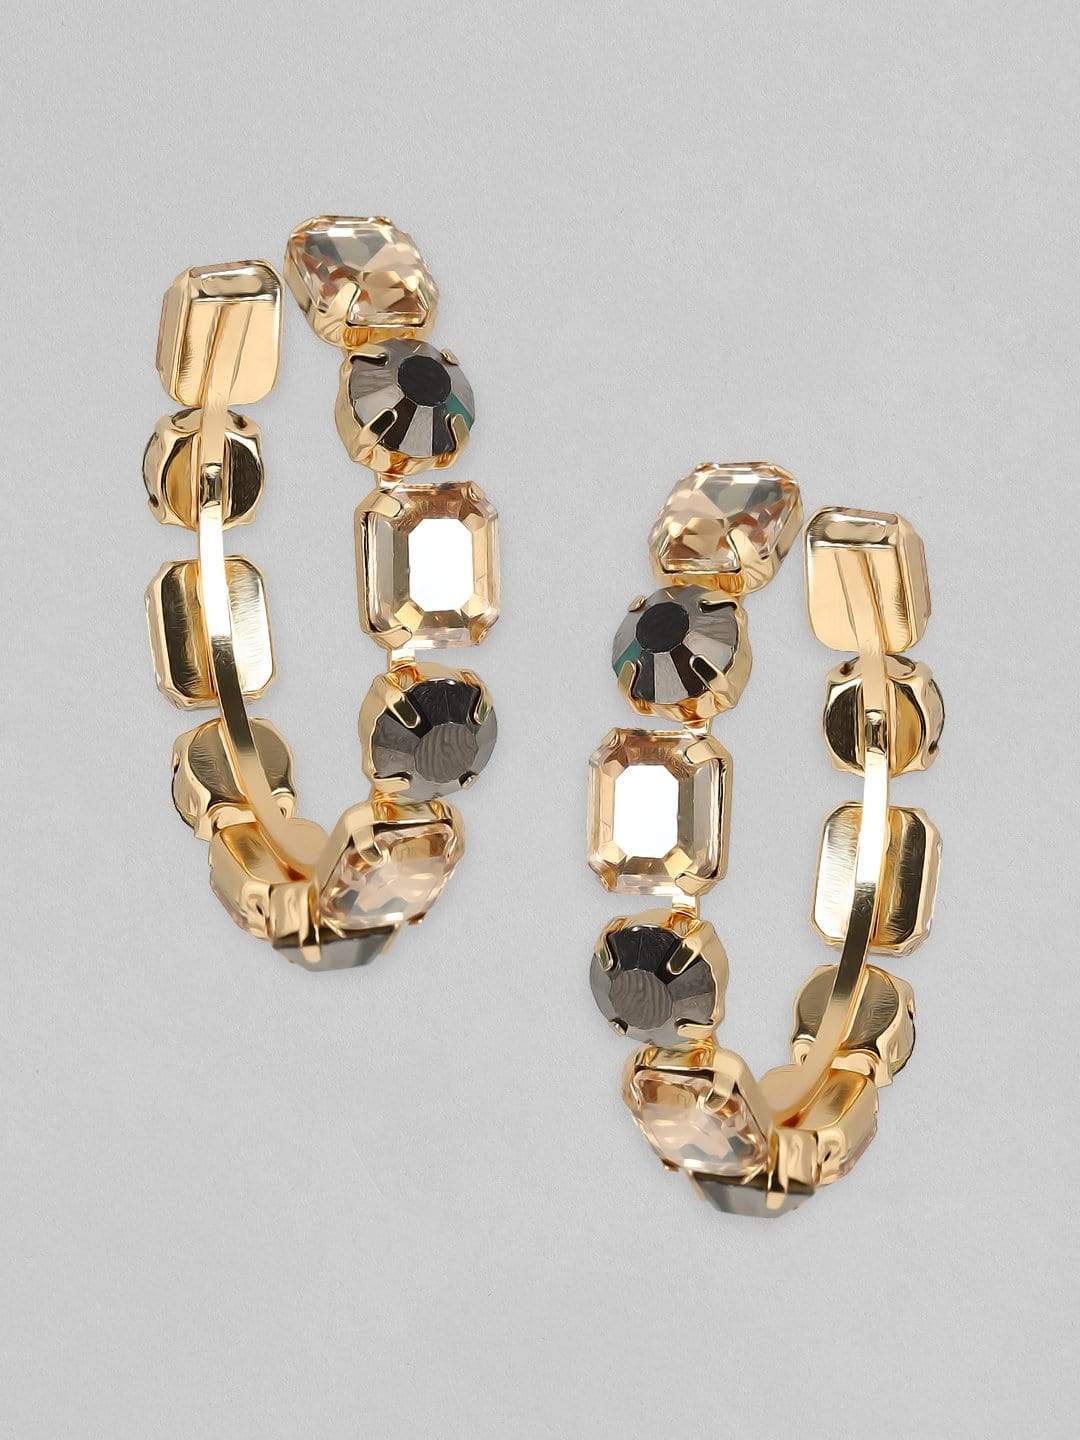 5Ct Round Cut Moissanite Three Stone Stud Earrings 14K Yellow Gold Plated  Silver | eBay